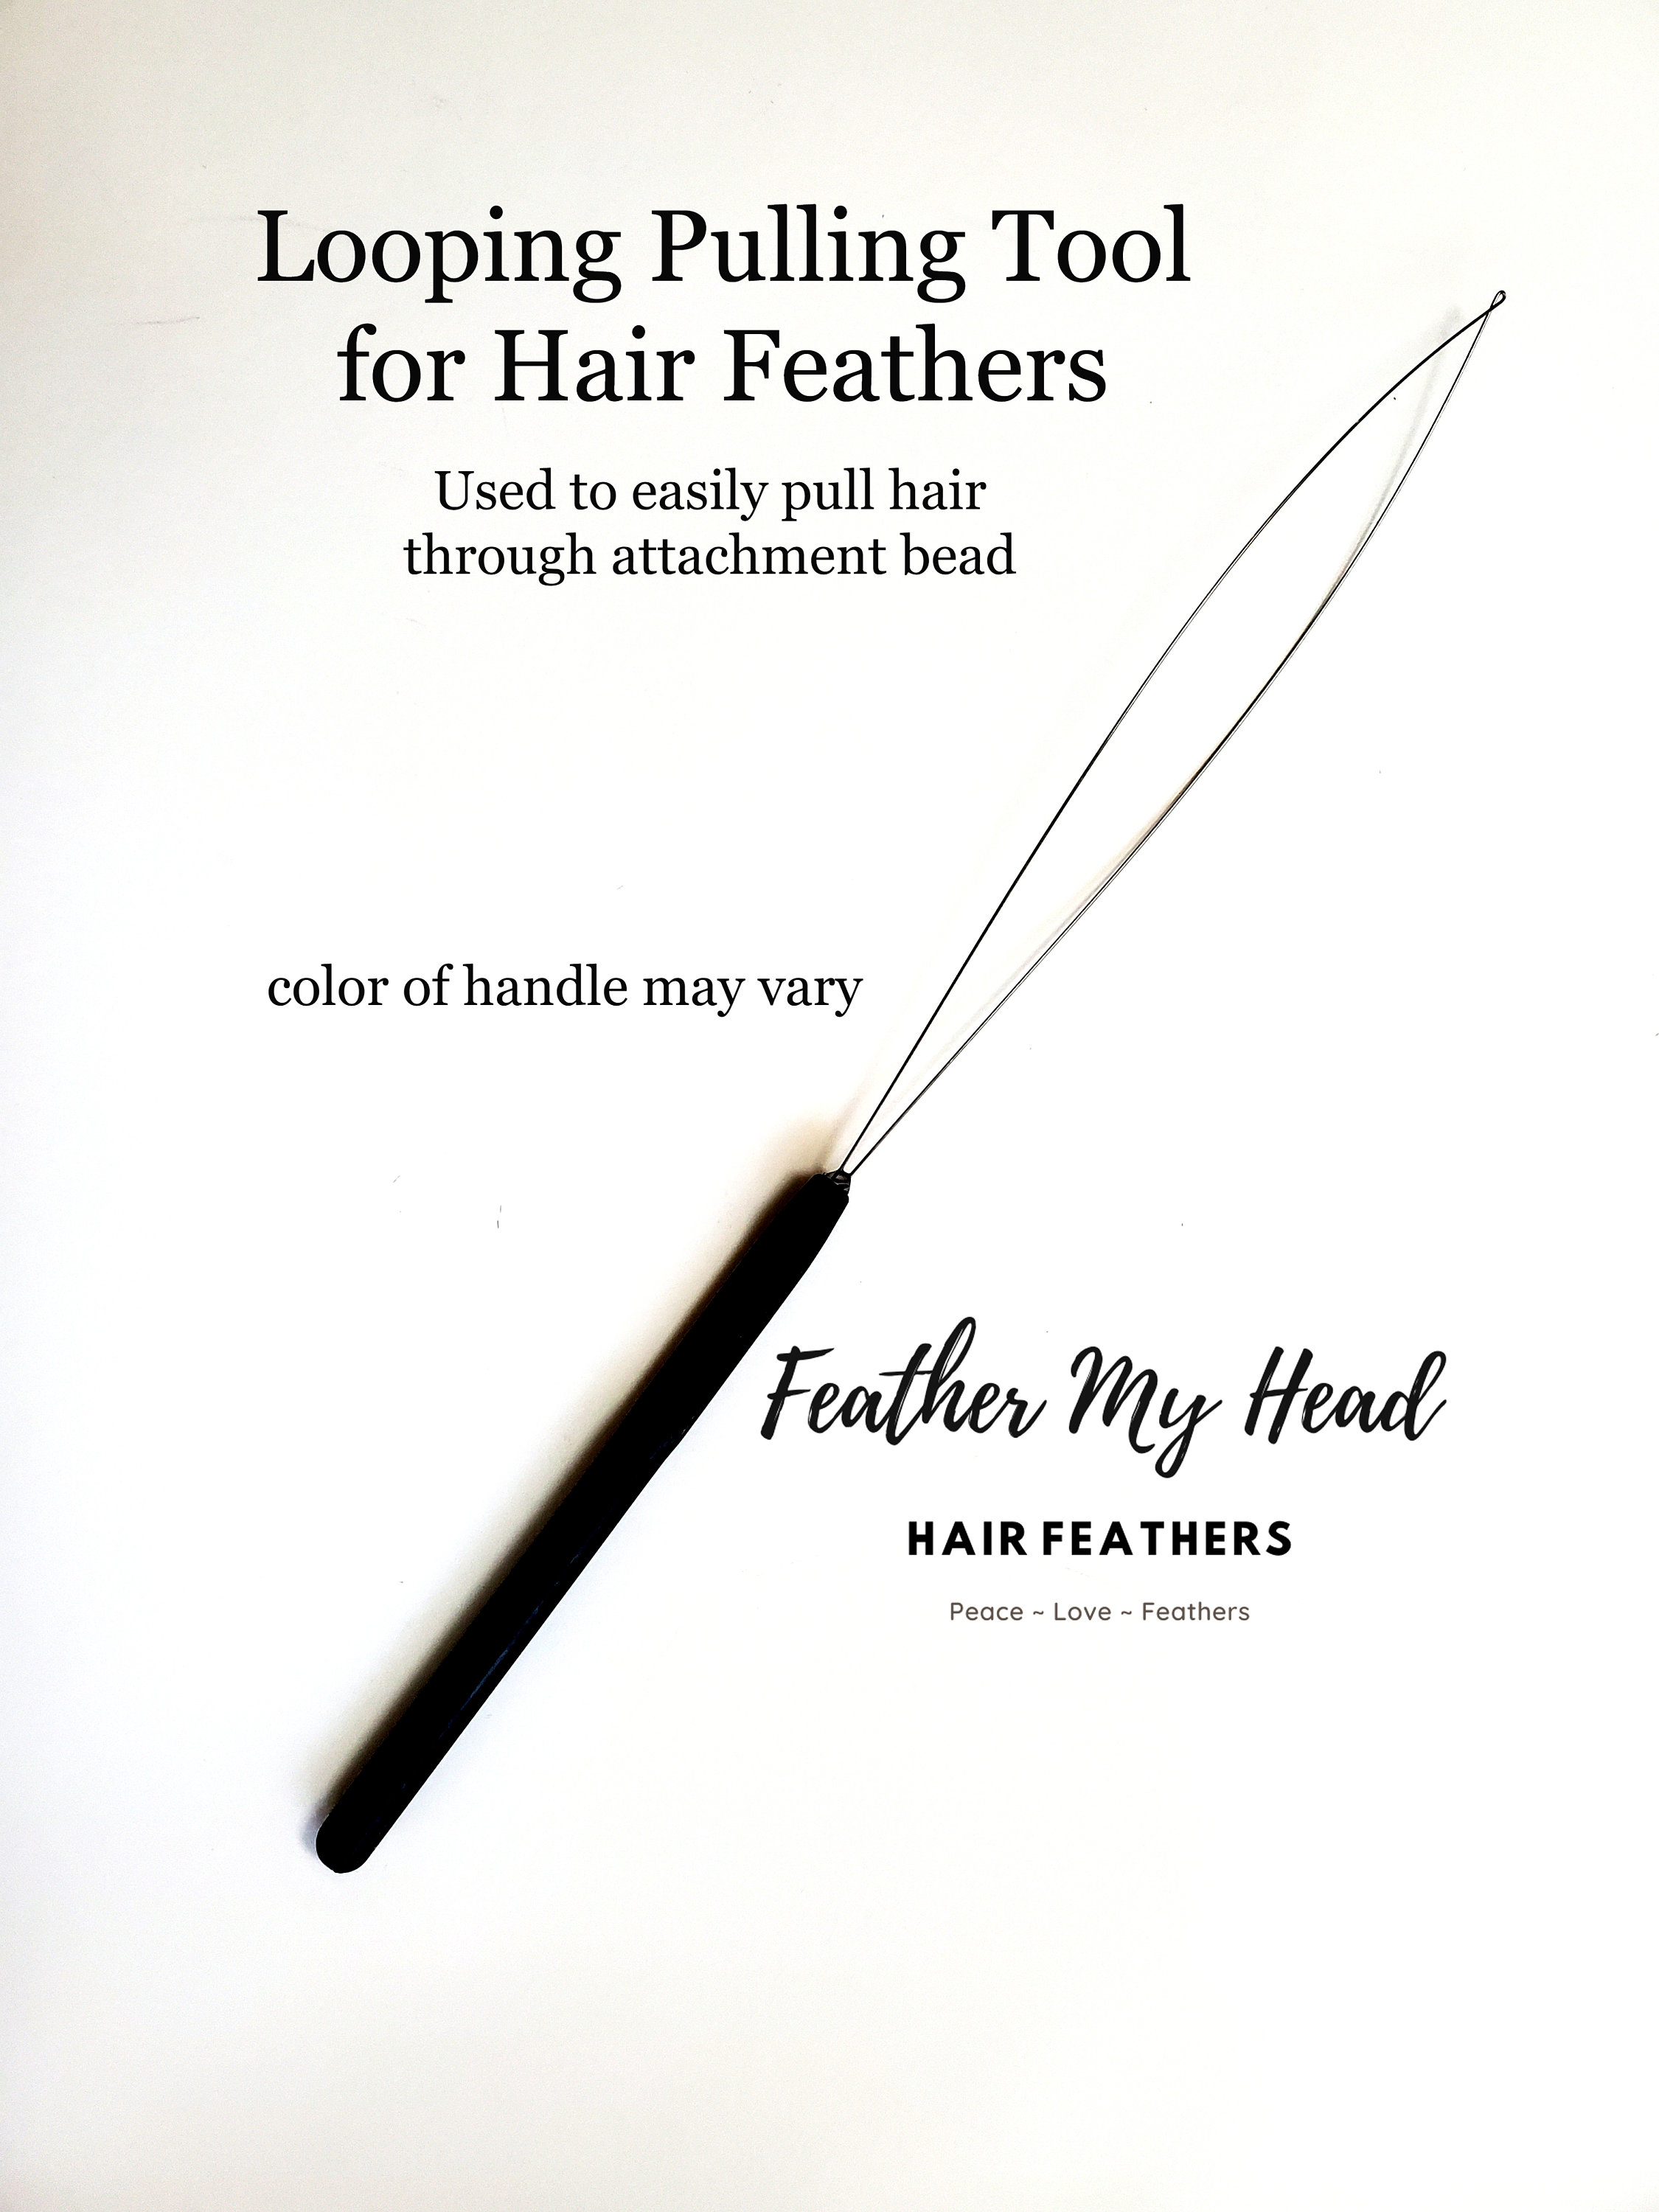 Feather Hair Extensions Kit: 5 Real Bonded Thin Feathers with 3 Hair Crimps and Hair Threader. Warm Colors, Red, Orange, Tiger, Rust, Sienna